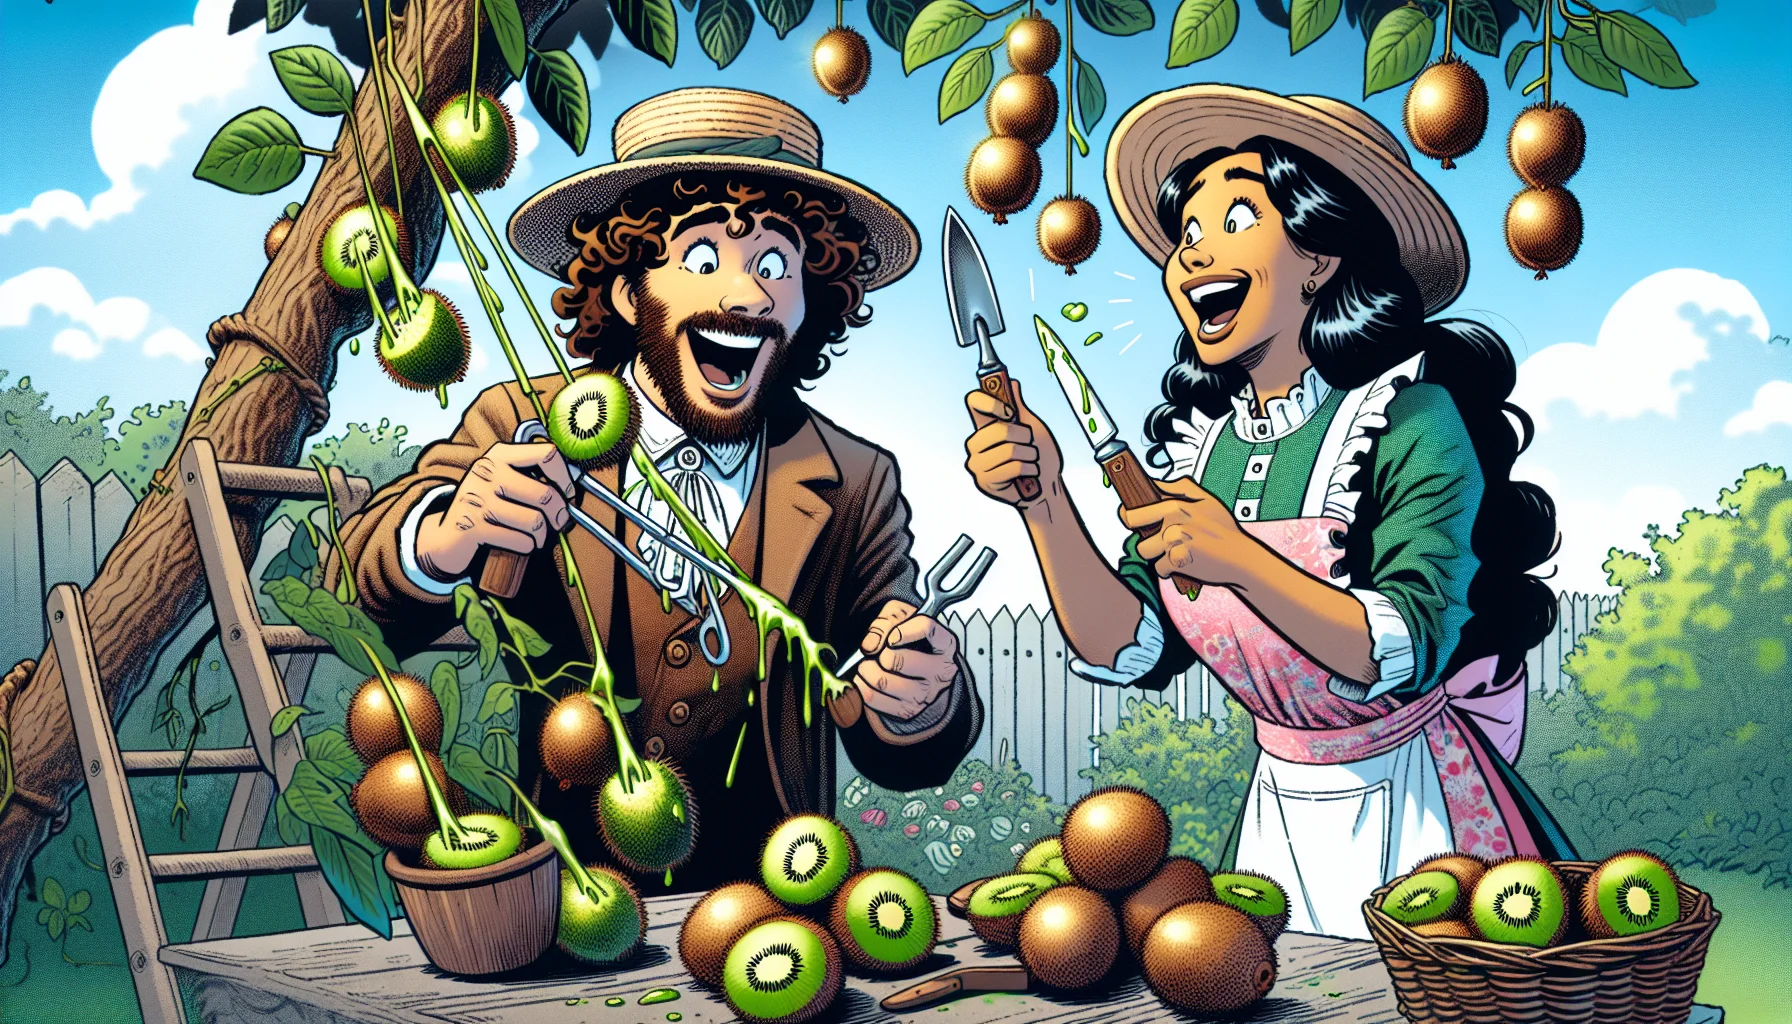 Imagine a comic-style picture showing a humorous scene taking place in a lush garden. On a warm sunny day, a white male gardener with curly brown hair and a Hispanic female gardener with long black hair, both wearing straw hats and colorful aprons, are working together. Unexpectedly, they discover a tree dripping with ripe, juicy kiwis. They are surprised and delighted, starting a playful kiwi-peeling competition. The man uses a fancy, large Victorian-style spoon while the woman skillfully employs a small, cute paring knife. Their laughter and excitement stir up the curiosity of the garden animals, inviting everyone to find joy in gardening.